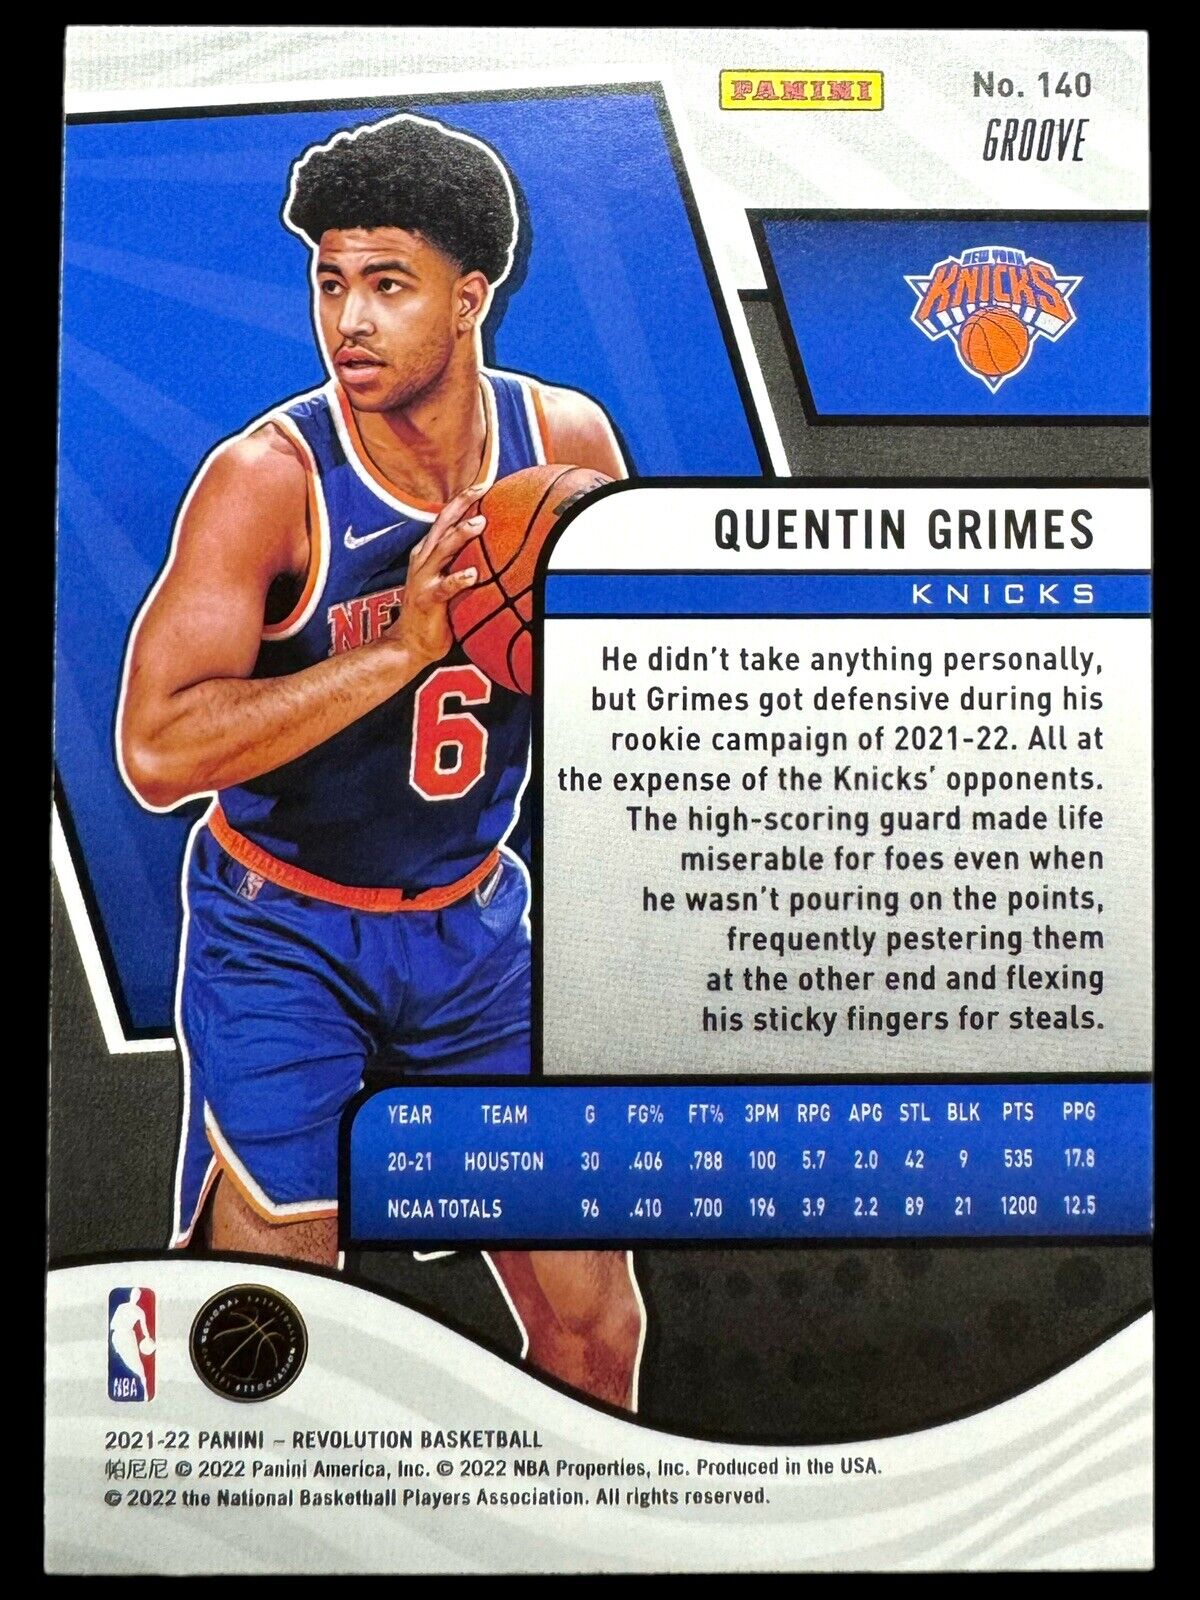 Quentin Grimes 2021/22 Revolution Groove Rookie #140-New York Knicks